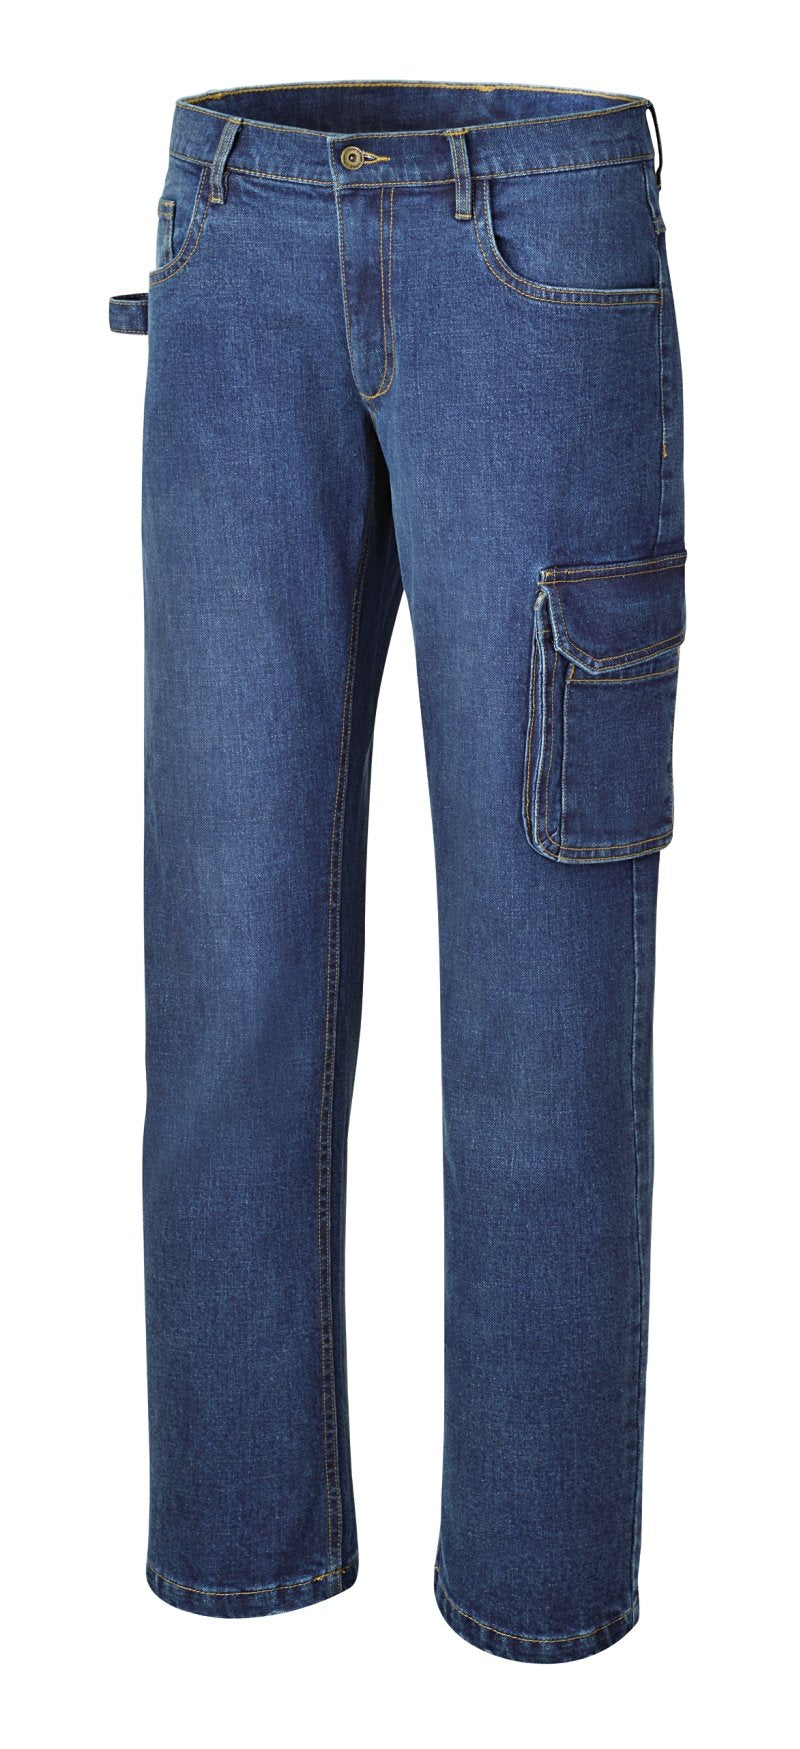 7528 - Stretch work jeans trousers